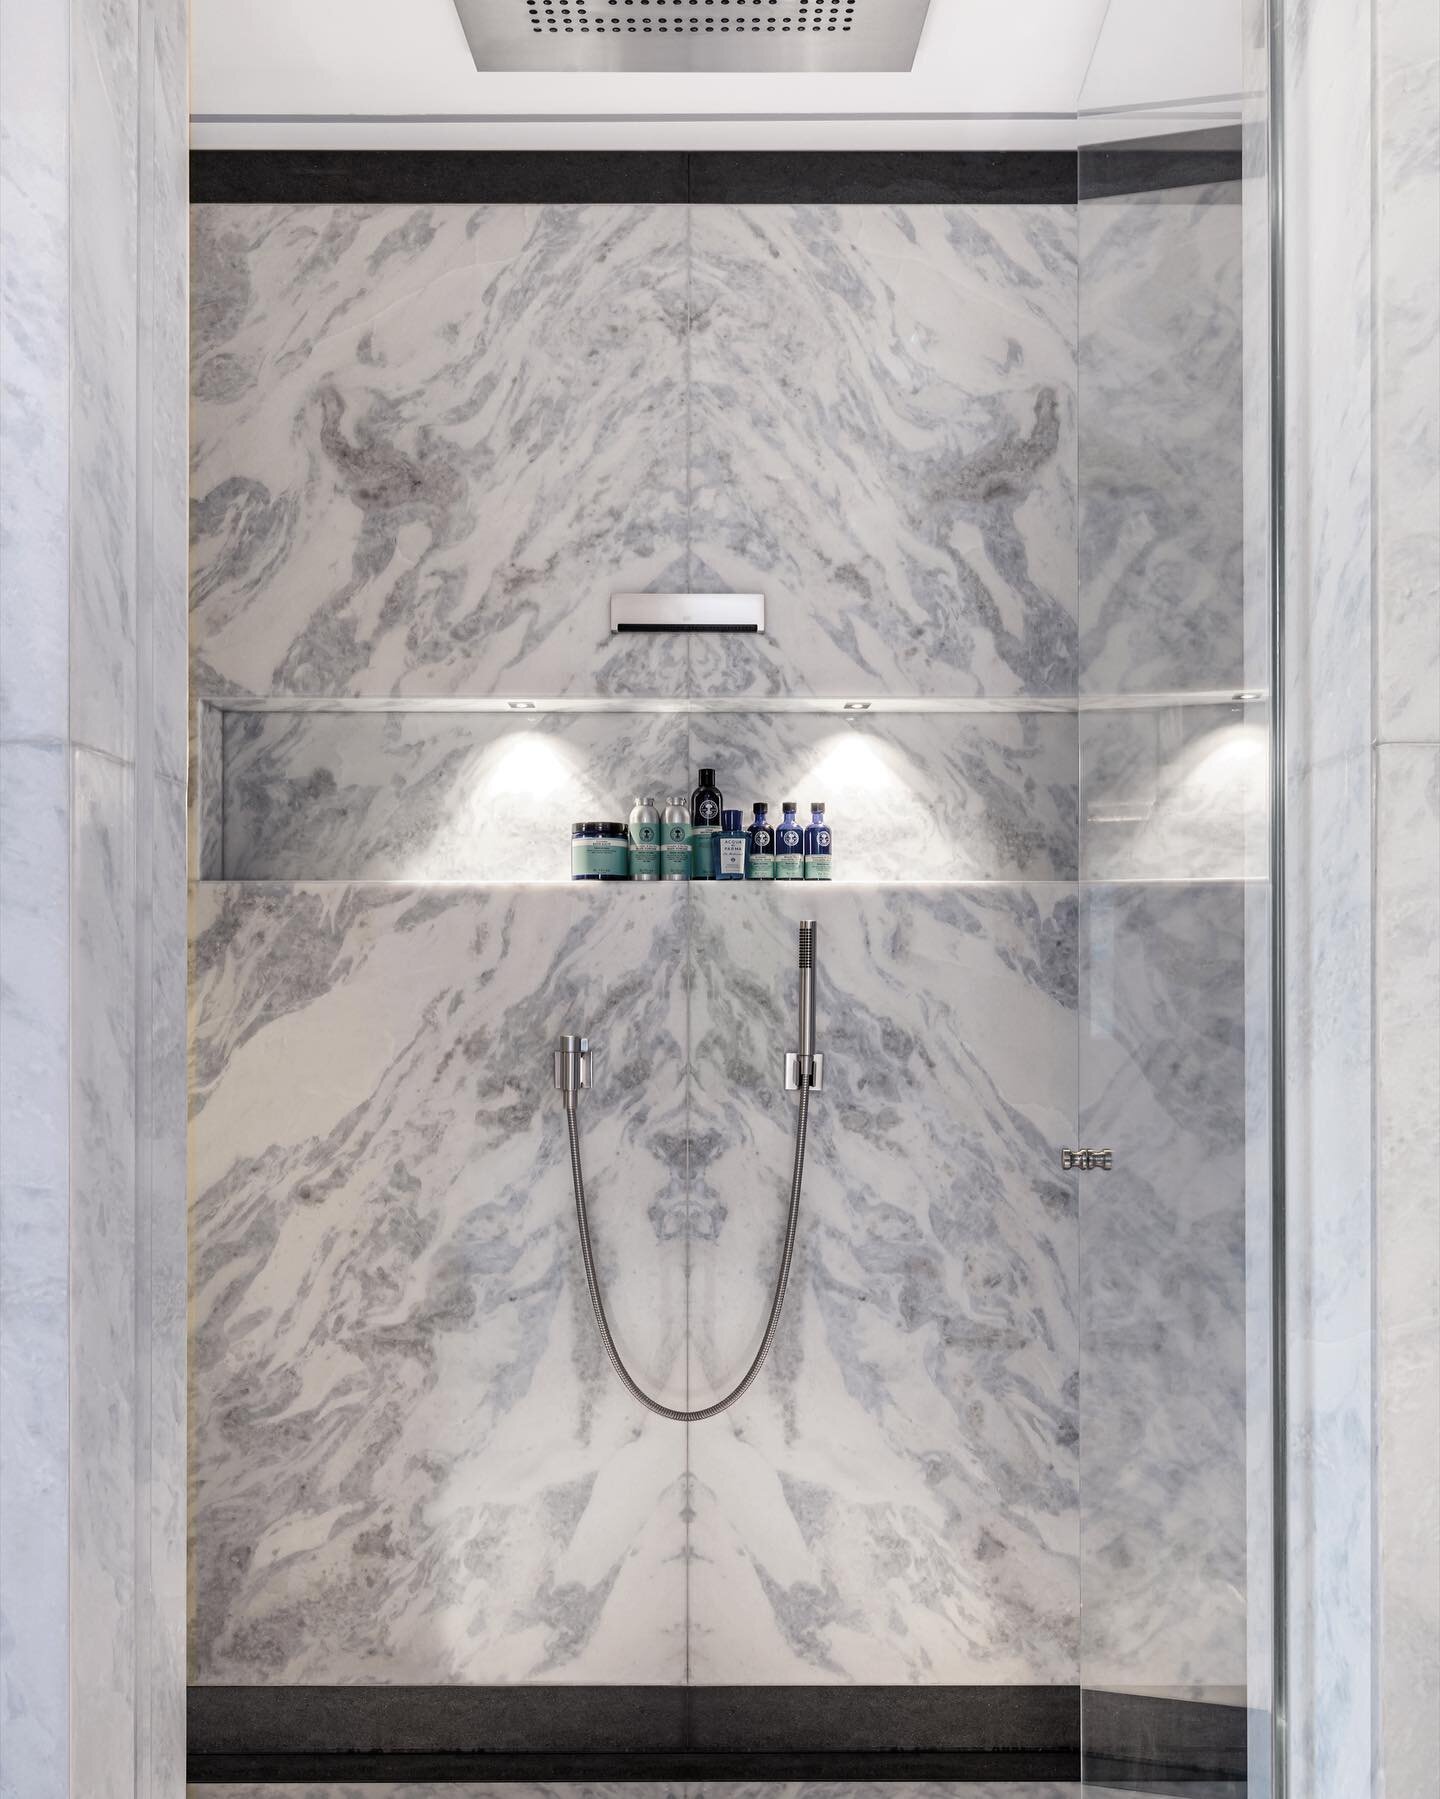 M A S T E R  E N S U I T E

Touring around the Design et al 2021 Shortlisted Chigwell Project.

The Master Ensuite - Still a favourite of mine, the obsession with marble, book-matching and border details continues...
Designed using a rare hand picked